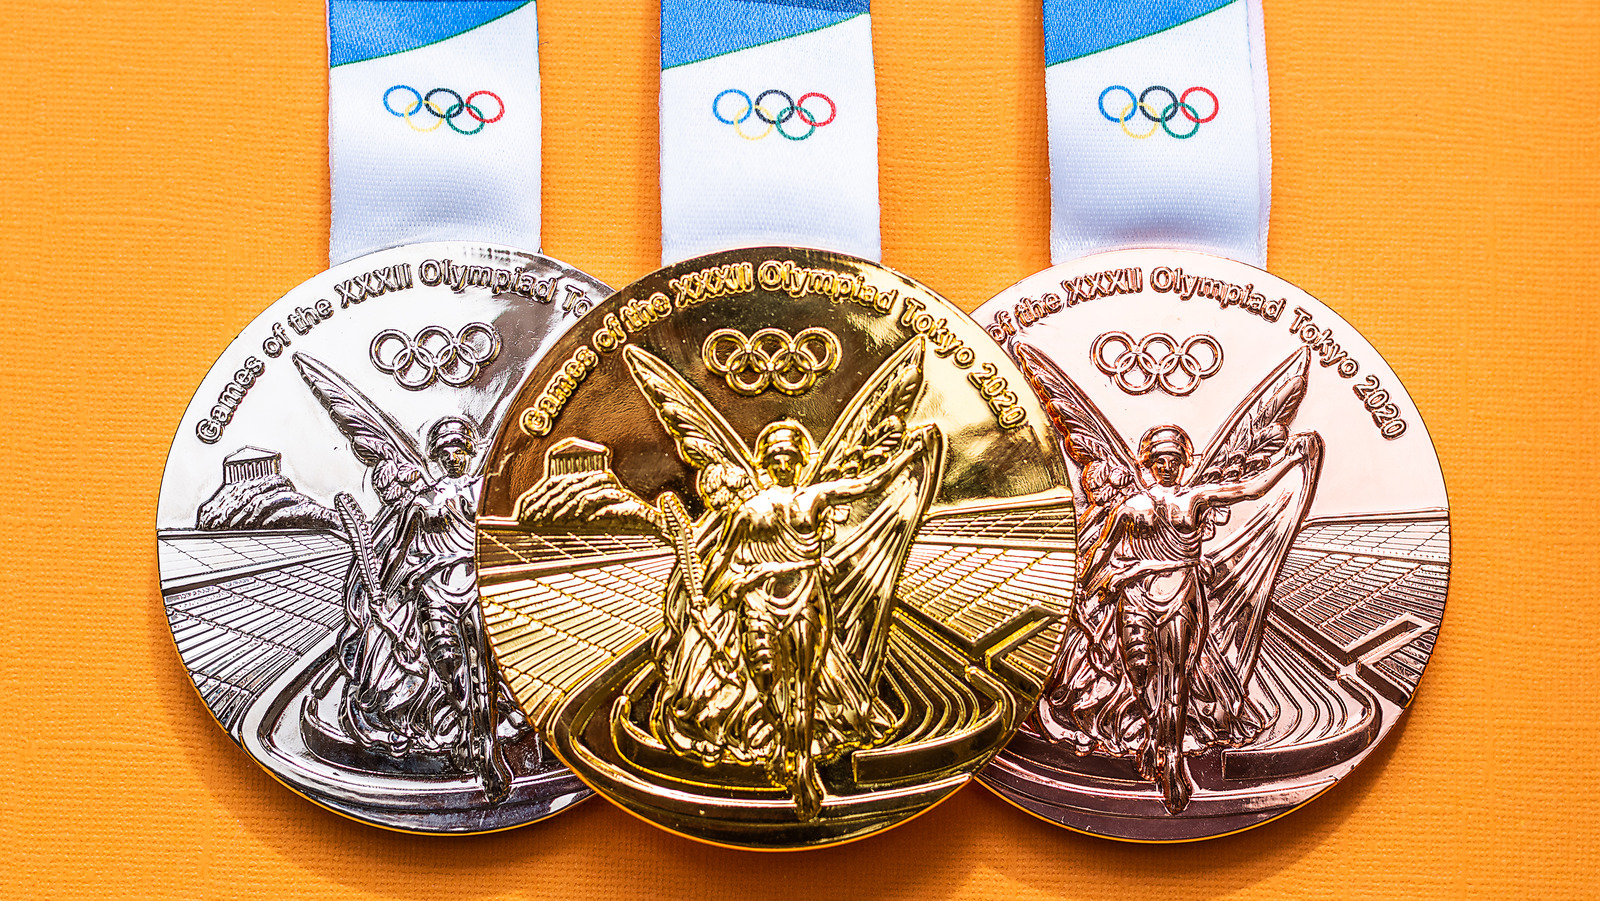 Here's What The 2020 Olympic Medals Are Actually Made Of